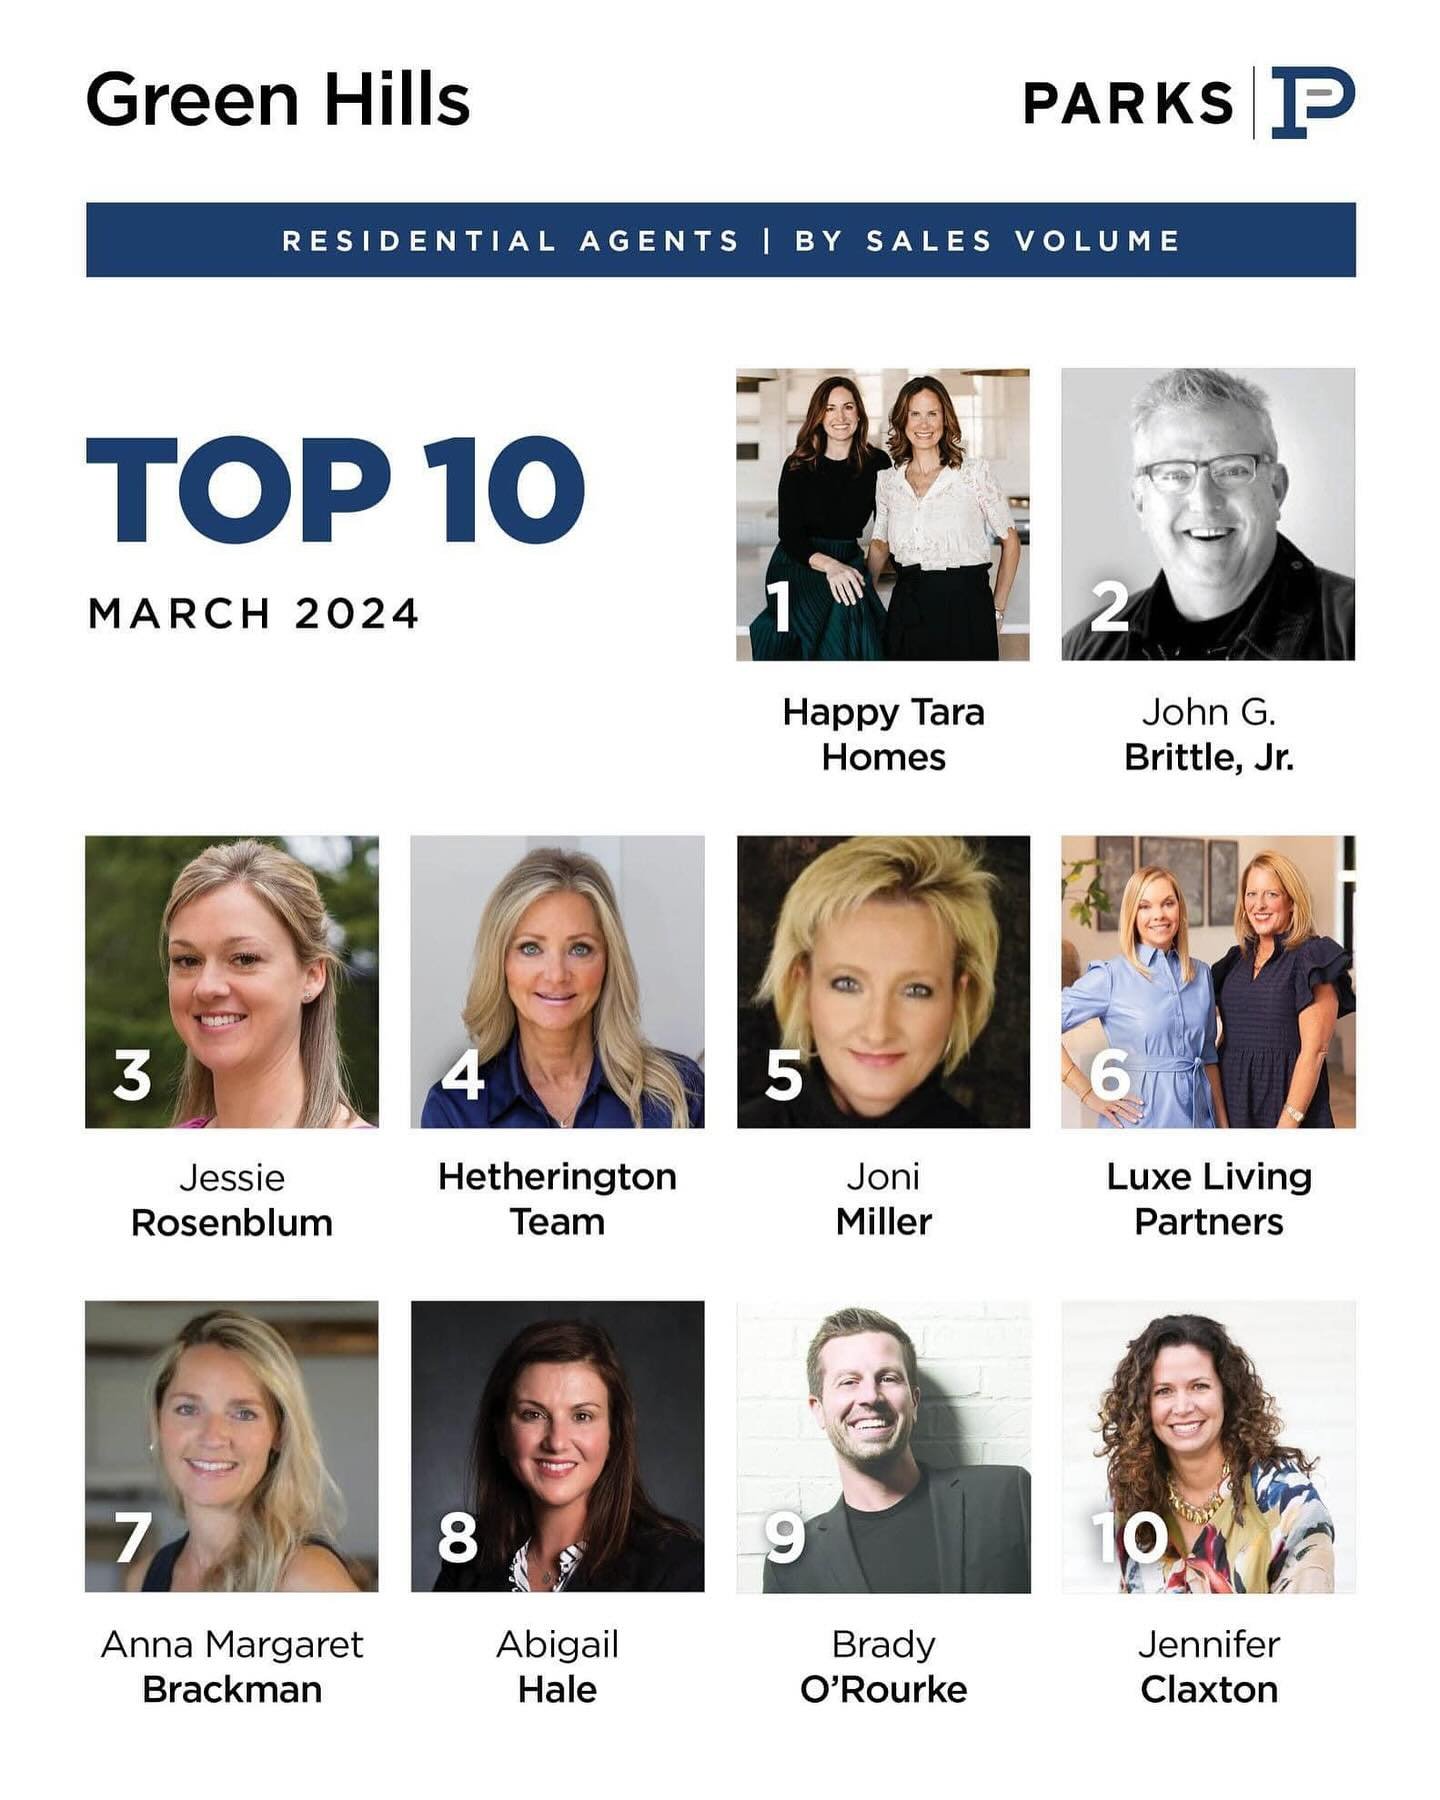 We are so grateful for a busy March! We are excited to have earned the top spot for sales volume for both the Green Hills office of Parks and for teams for the company overall.

Thank you so much to our clients who trusted us with their home sale or 